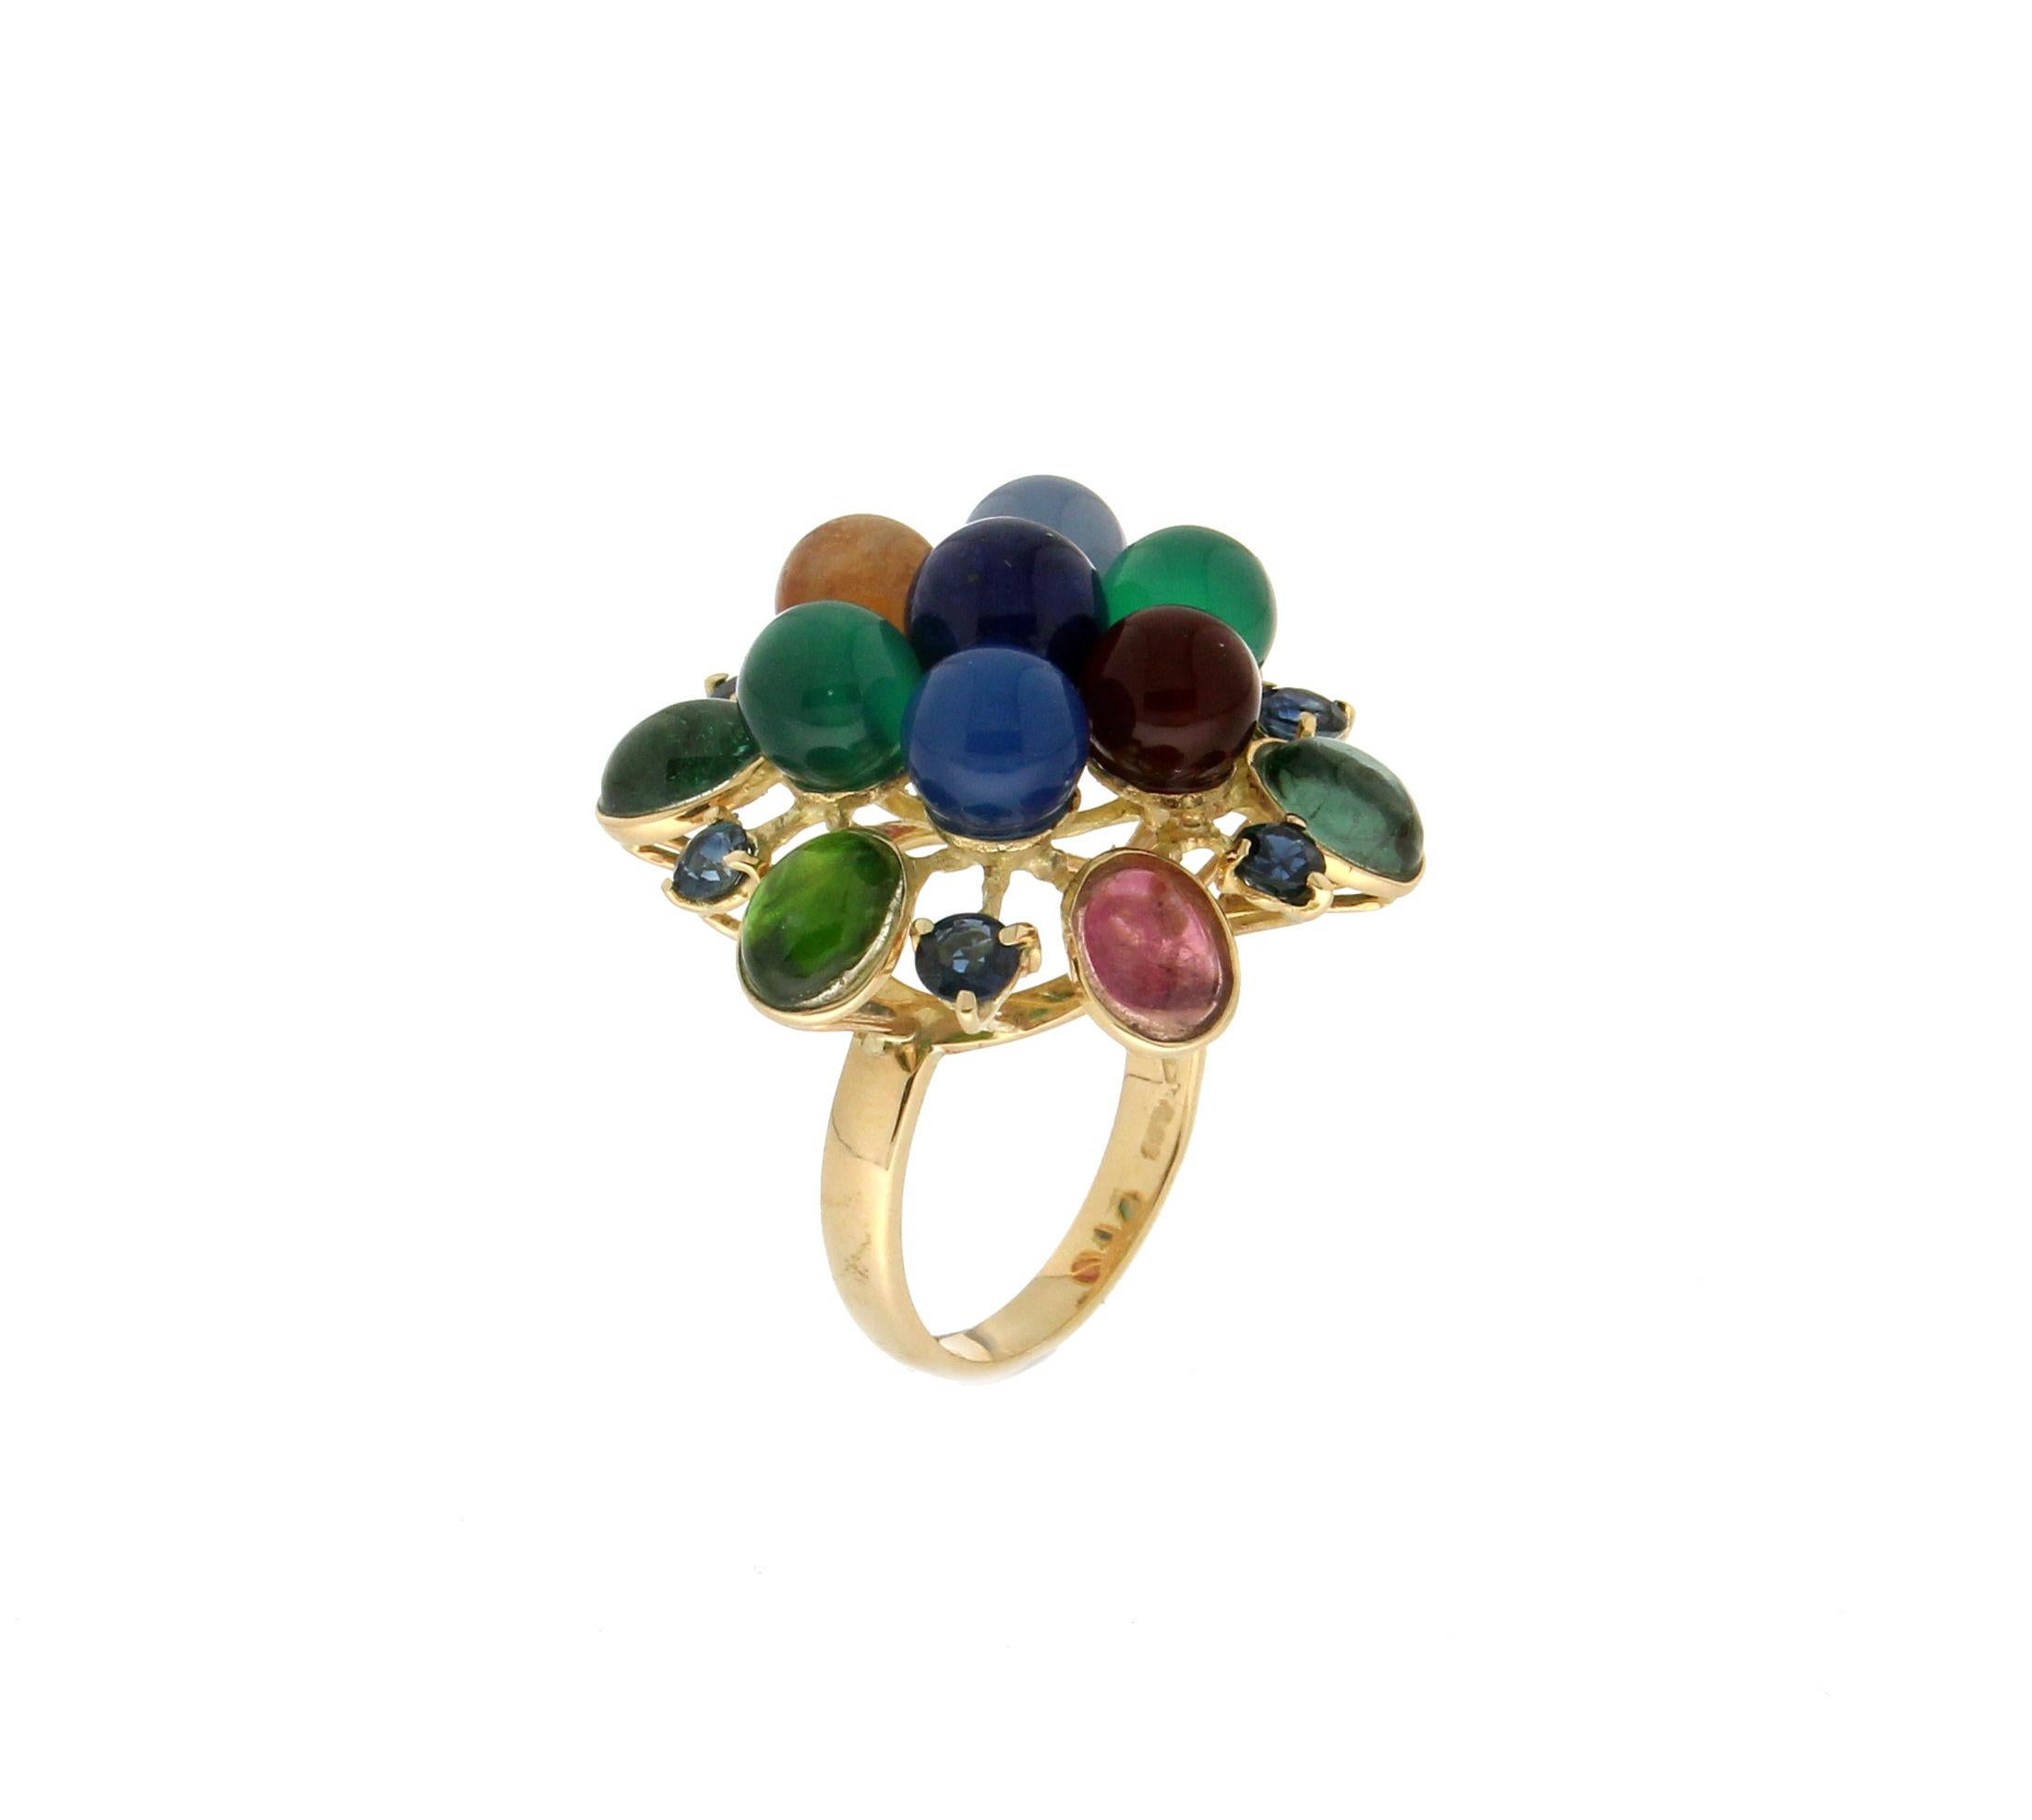 Cabochon Handcraft 18 Karat Yellow Gold Sapphires and Semiprecious Stones Cocktail Ring For Sale